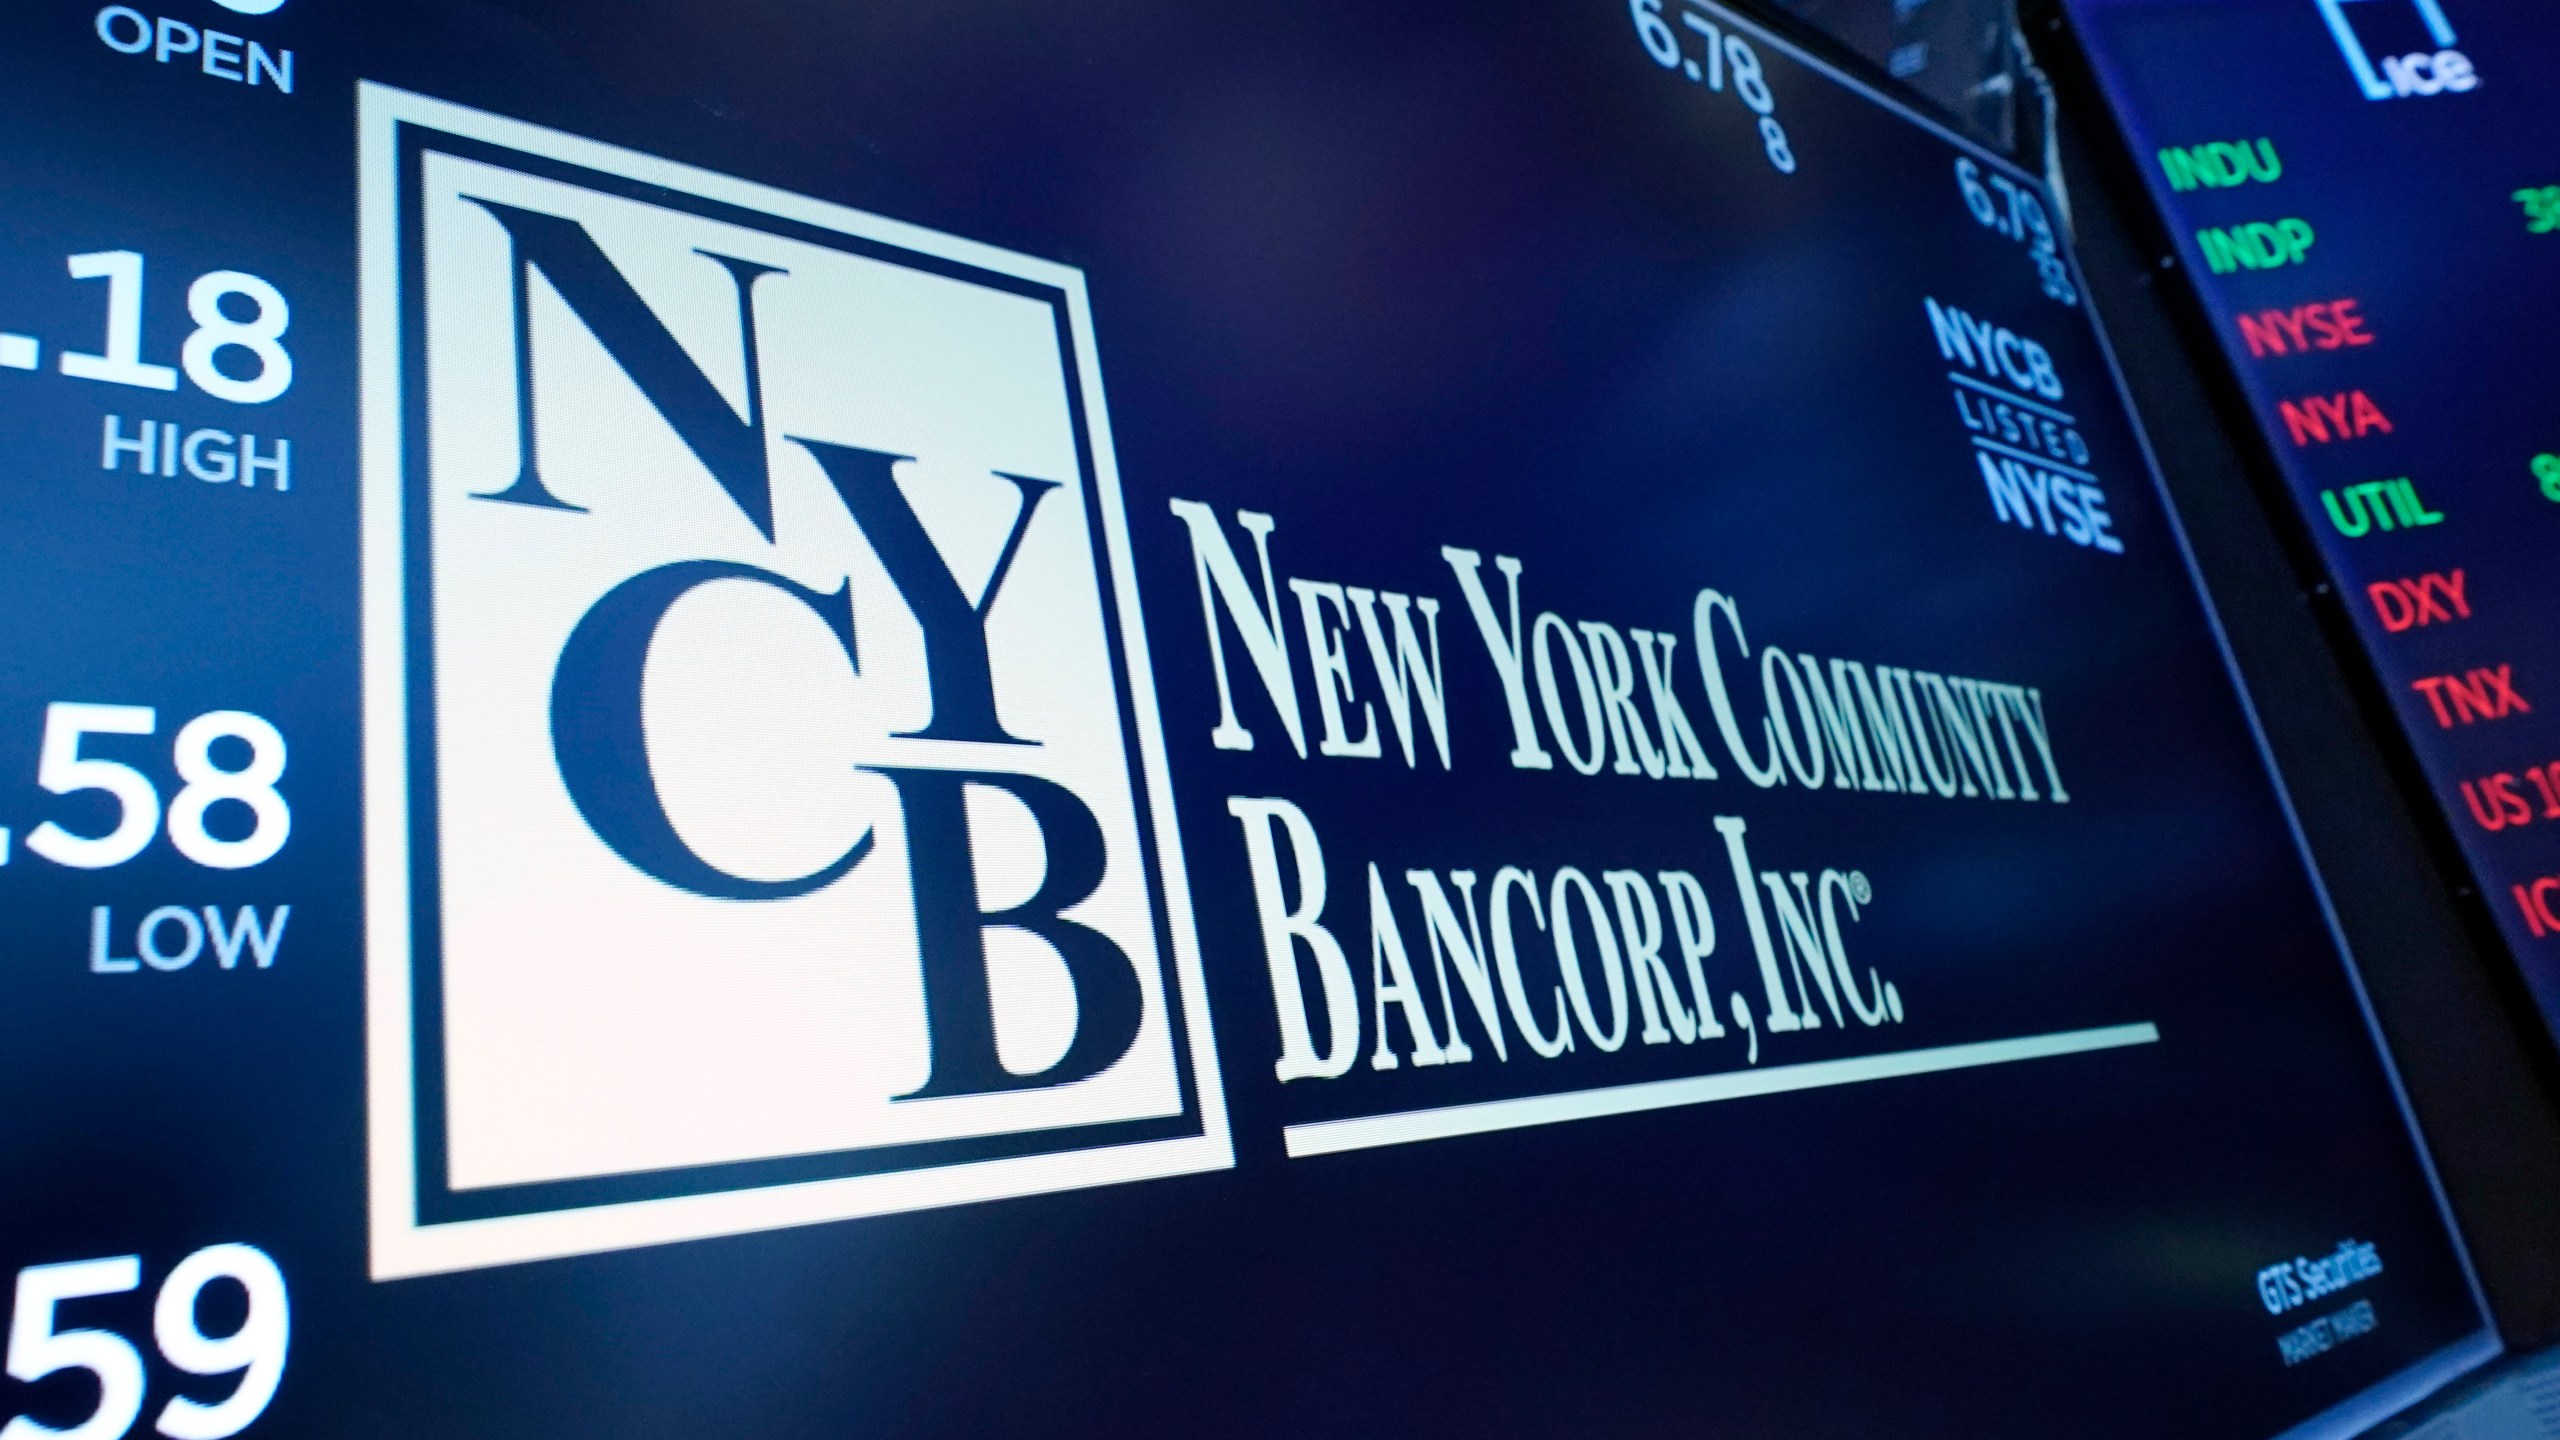 FILE - The logo for New York Community Bancorp is displayed above a trading post on the floor of the New York Stock Exchange, Jan. 31, 2024. New York Community Bancorp's stock plunged even more Wednesday, March 6, 2024 sending it below $2 and down more than 80% for the year so far. (AP Photo/Richard Drew, File)